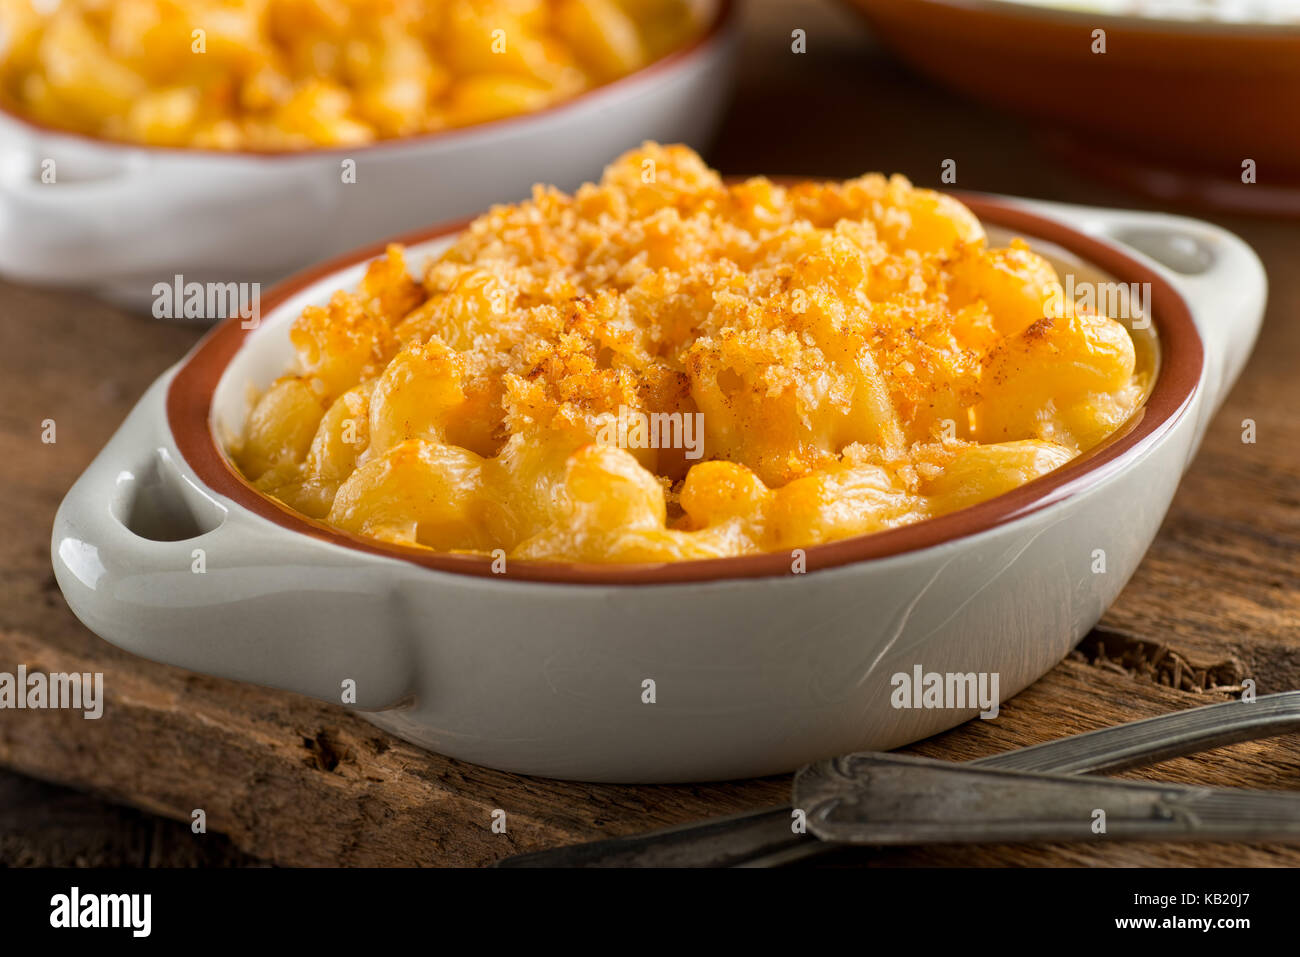 A bowl of delicious homemade mac and cheese. Stock Photo